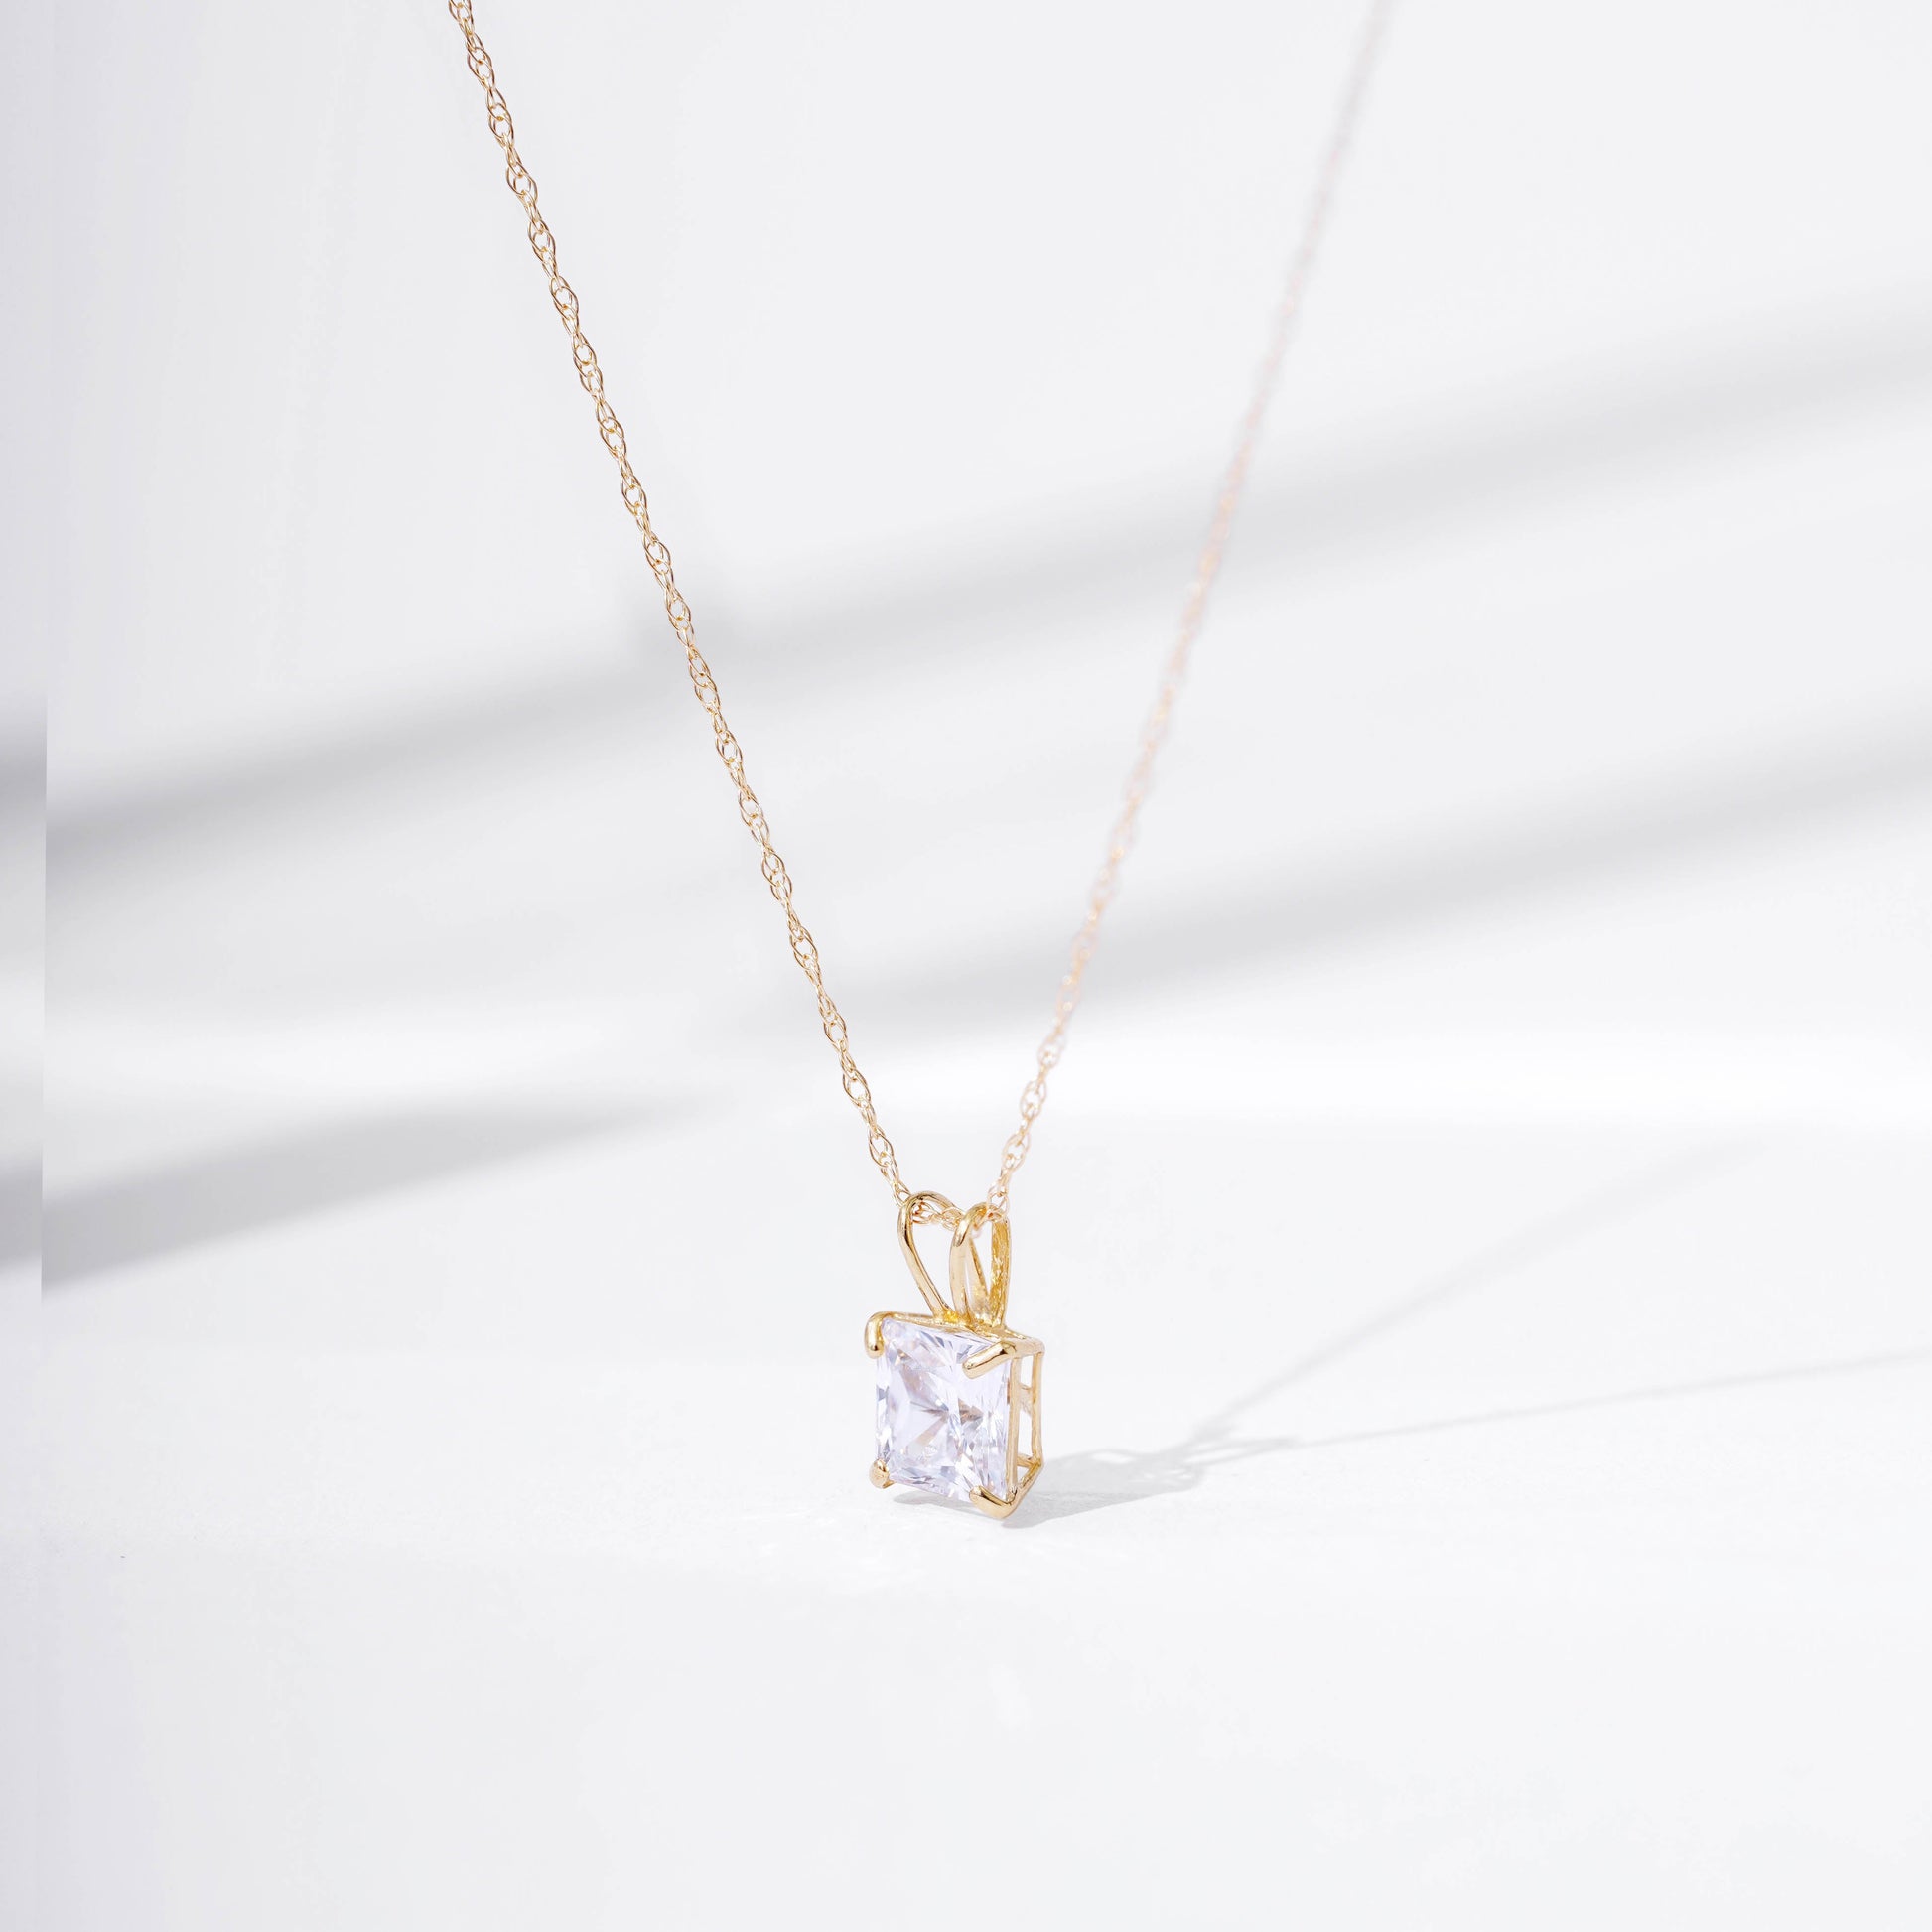 14K Gold 1cttw Zirconia Square Pendant with Chain